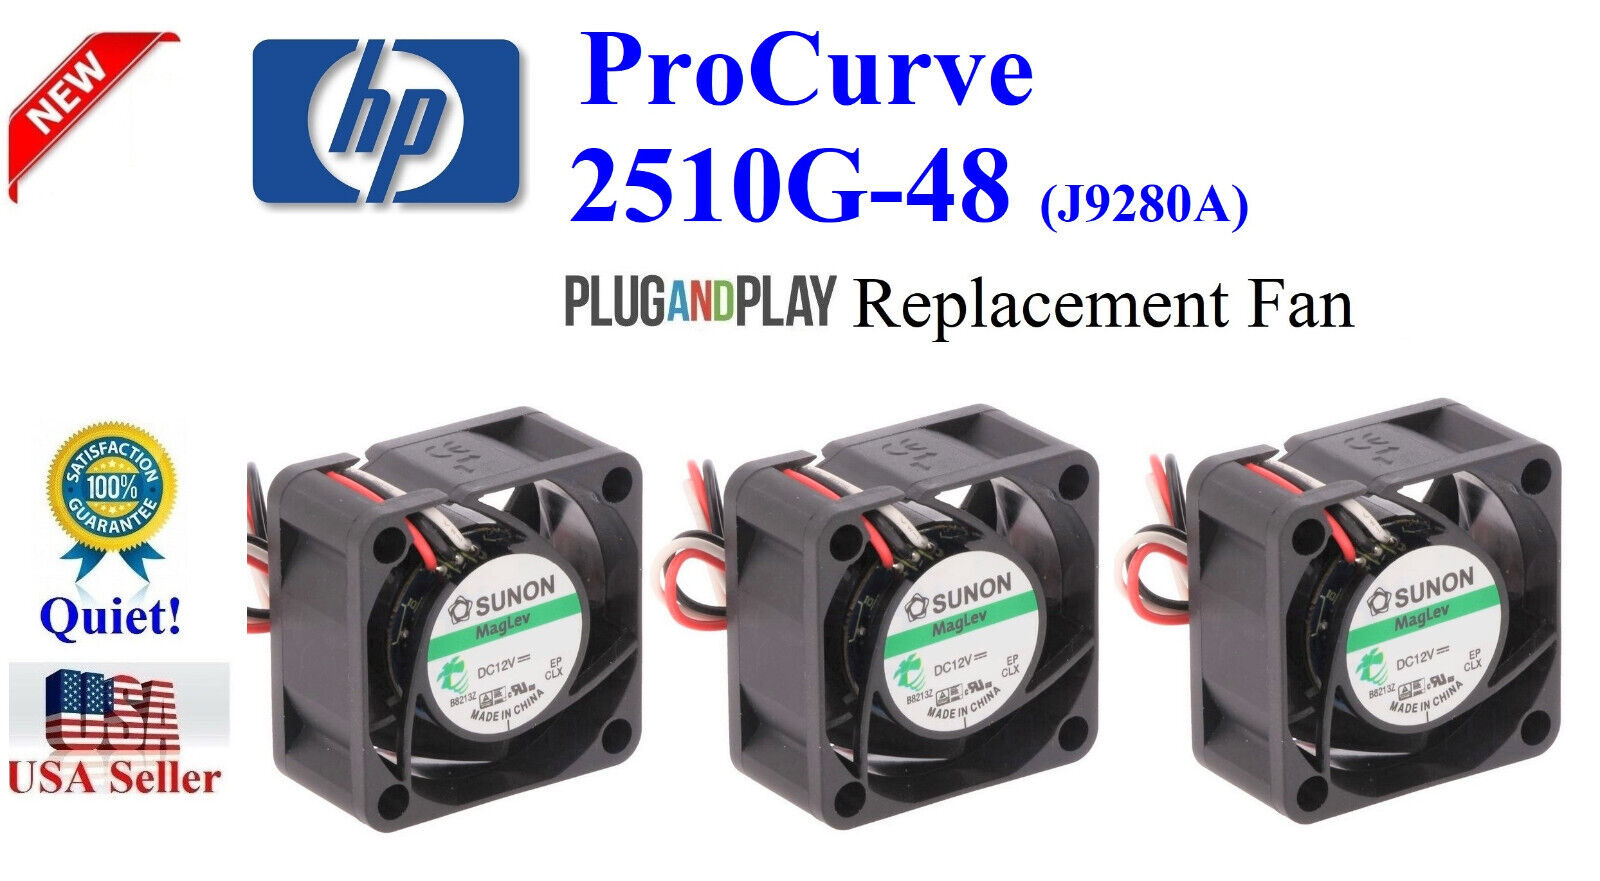 3x Quiet Plug-and-Play Replacement Fans for HP ProCurve 2510G-48 (J9280A)